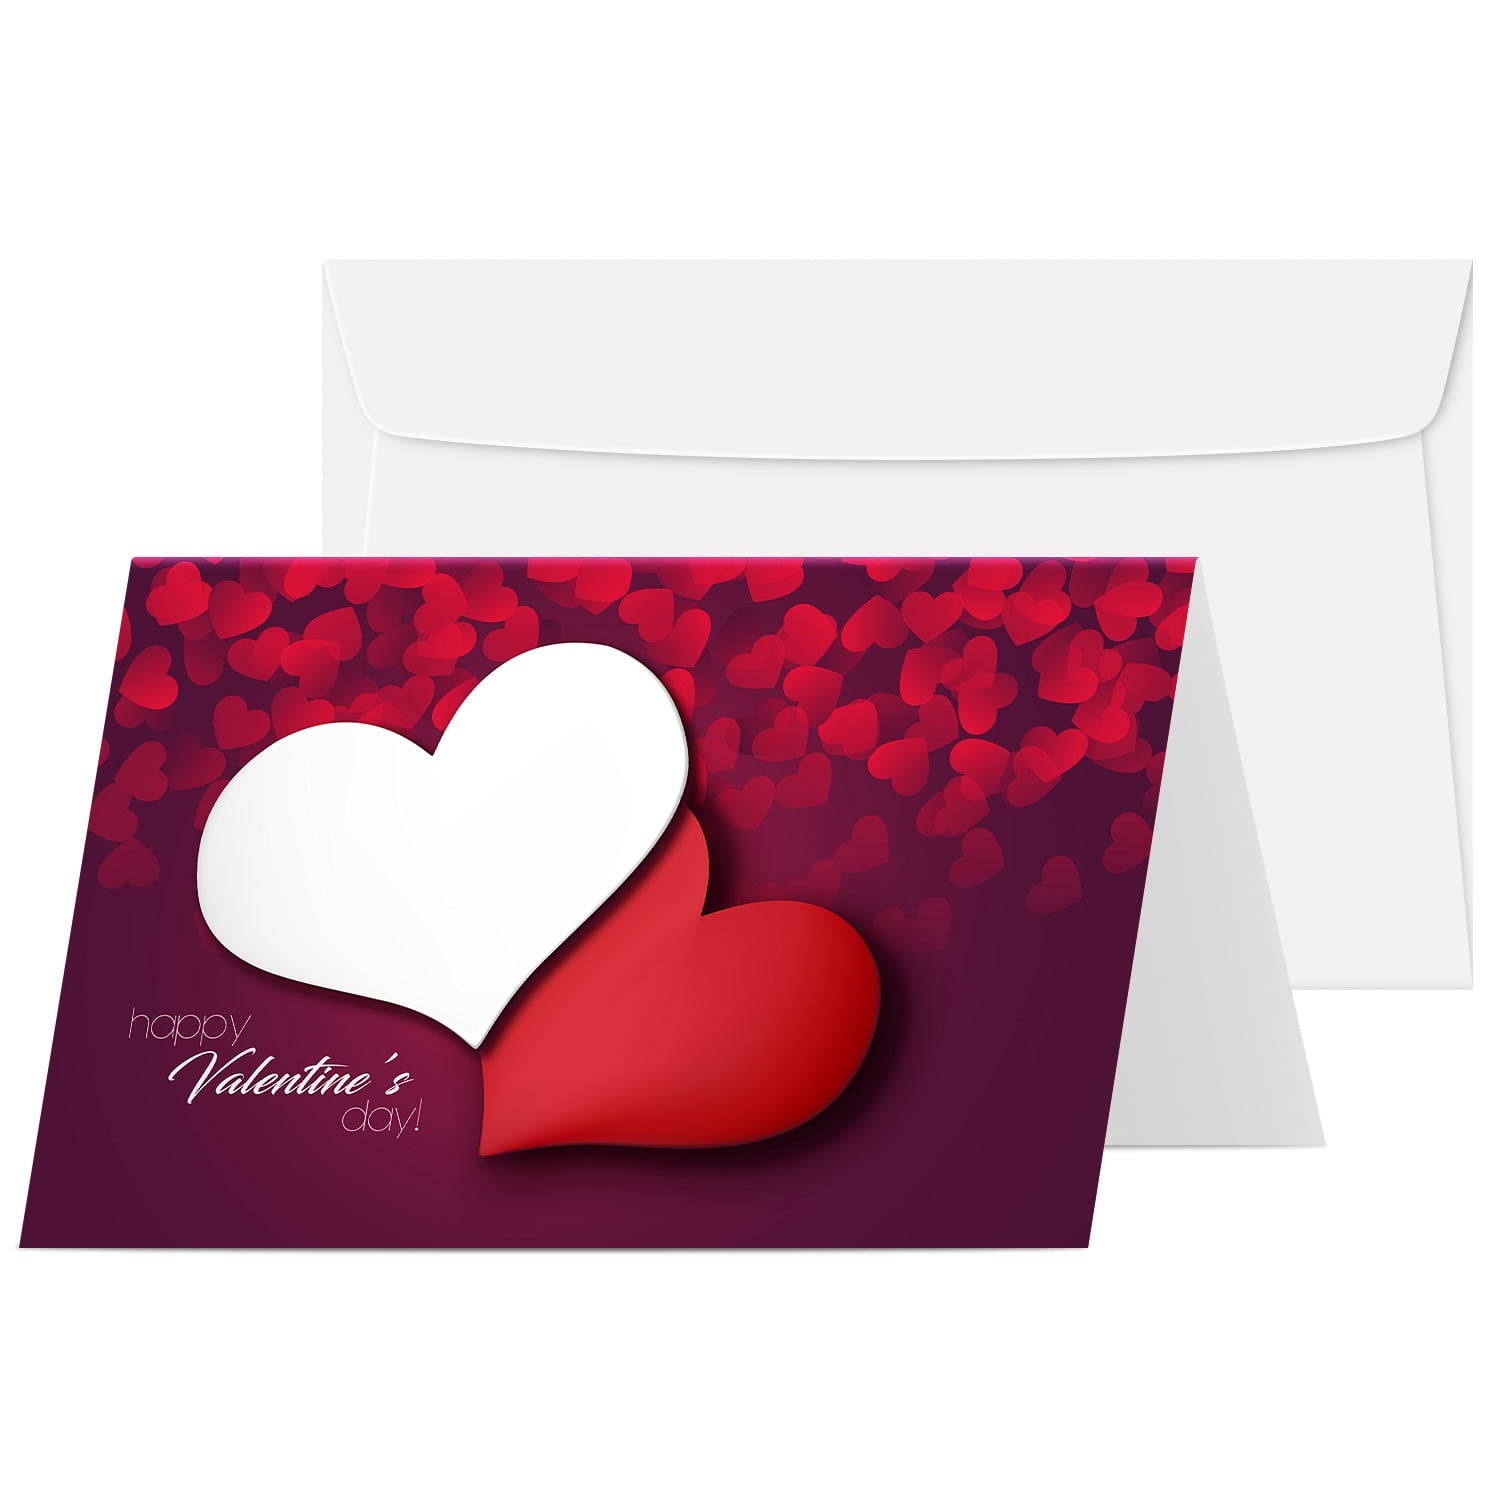 I love you ‘just because card and Valentine’s Day card for husband girlfriend friend fiancé boyfriend wife